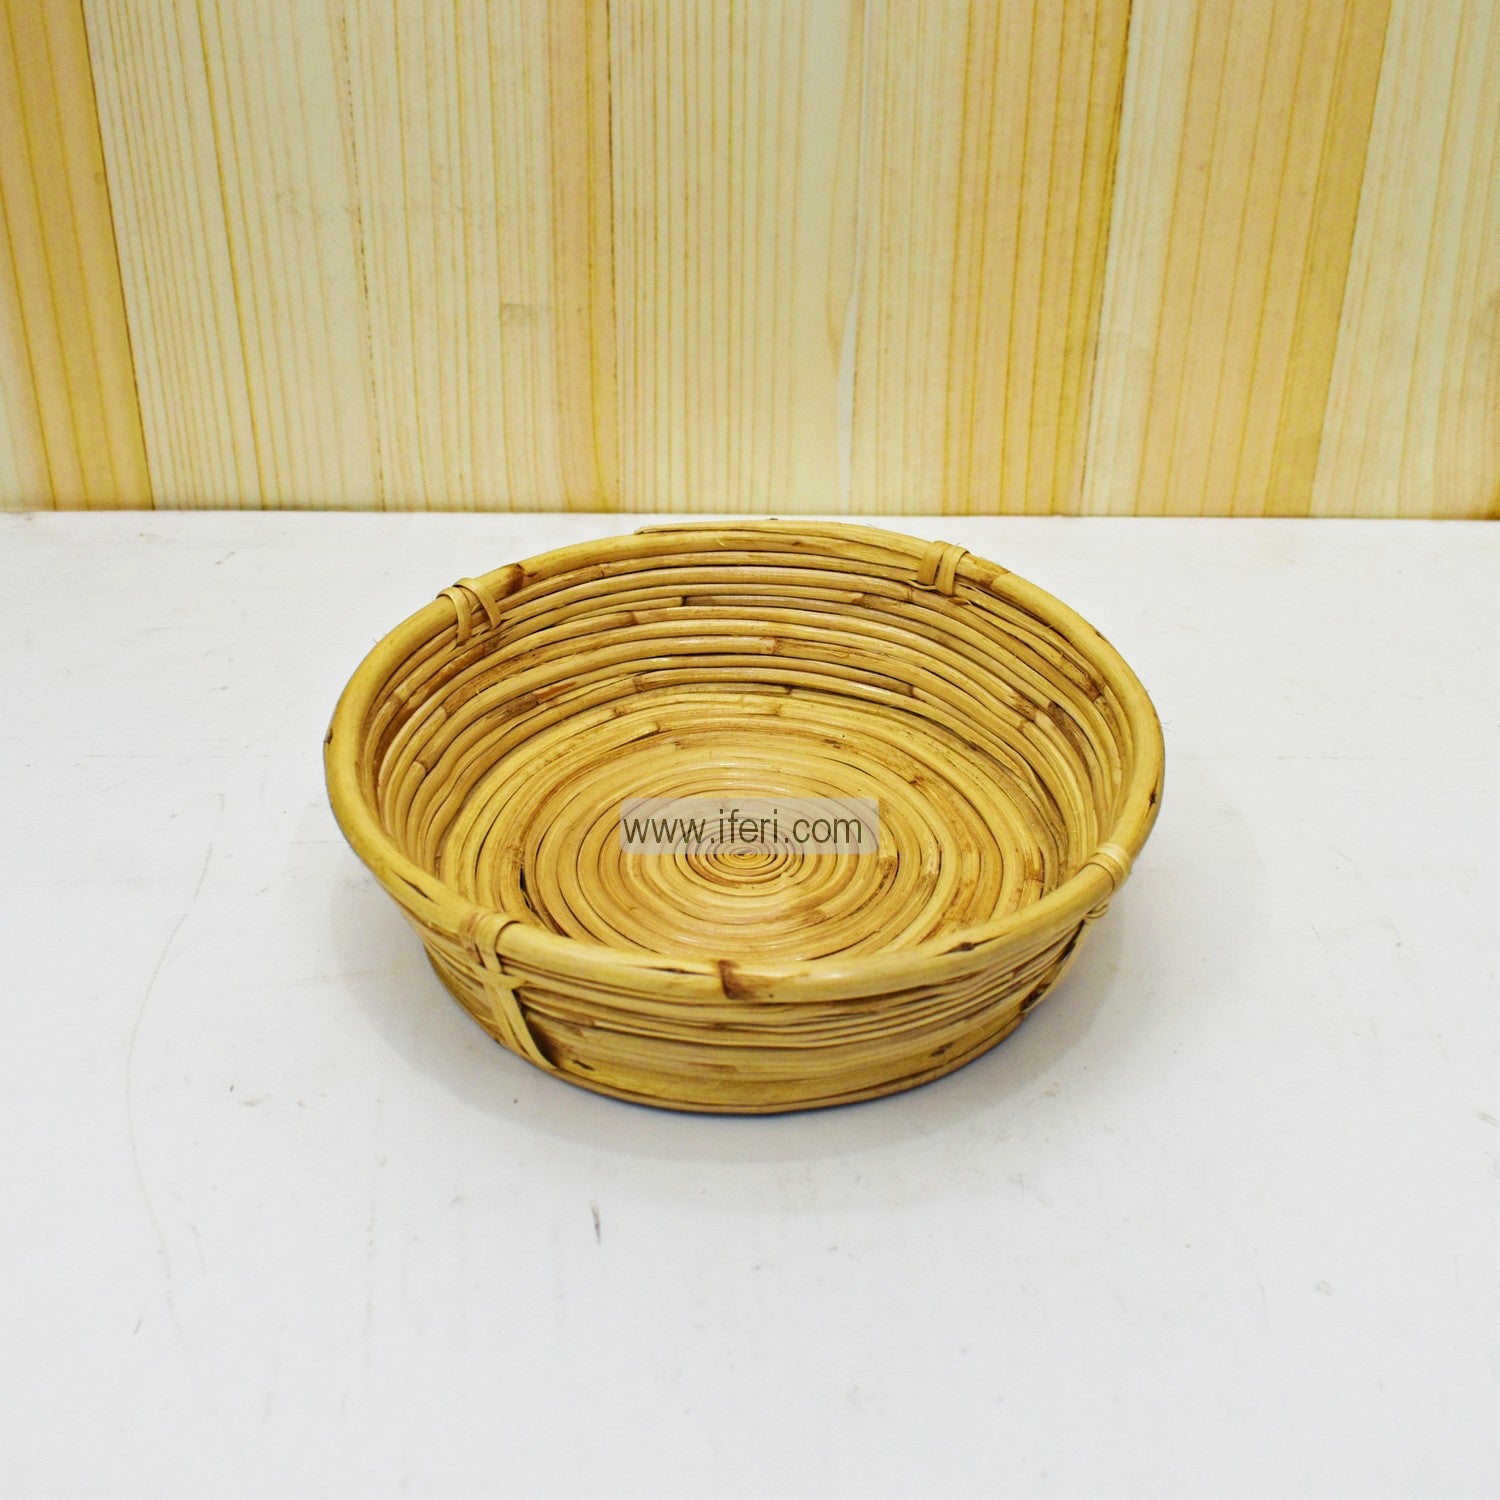 8.5 inch Round Bread and Roti Basket for Kitchen and Dining Serving ALF0992